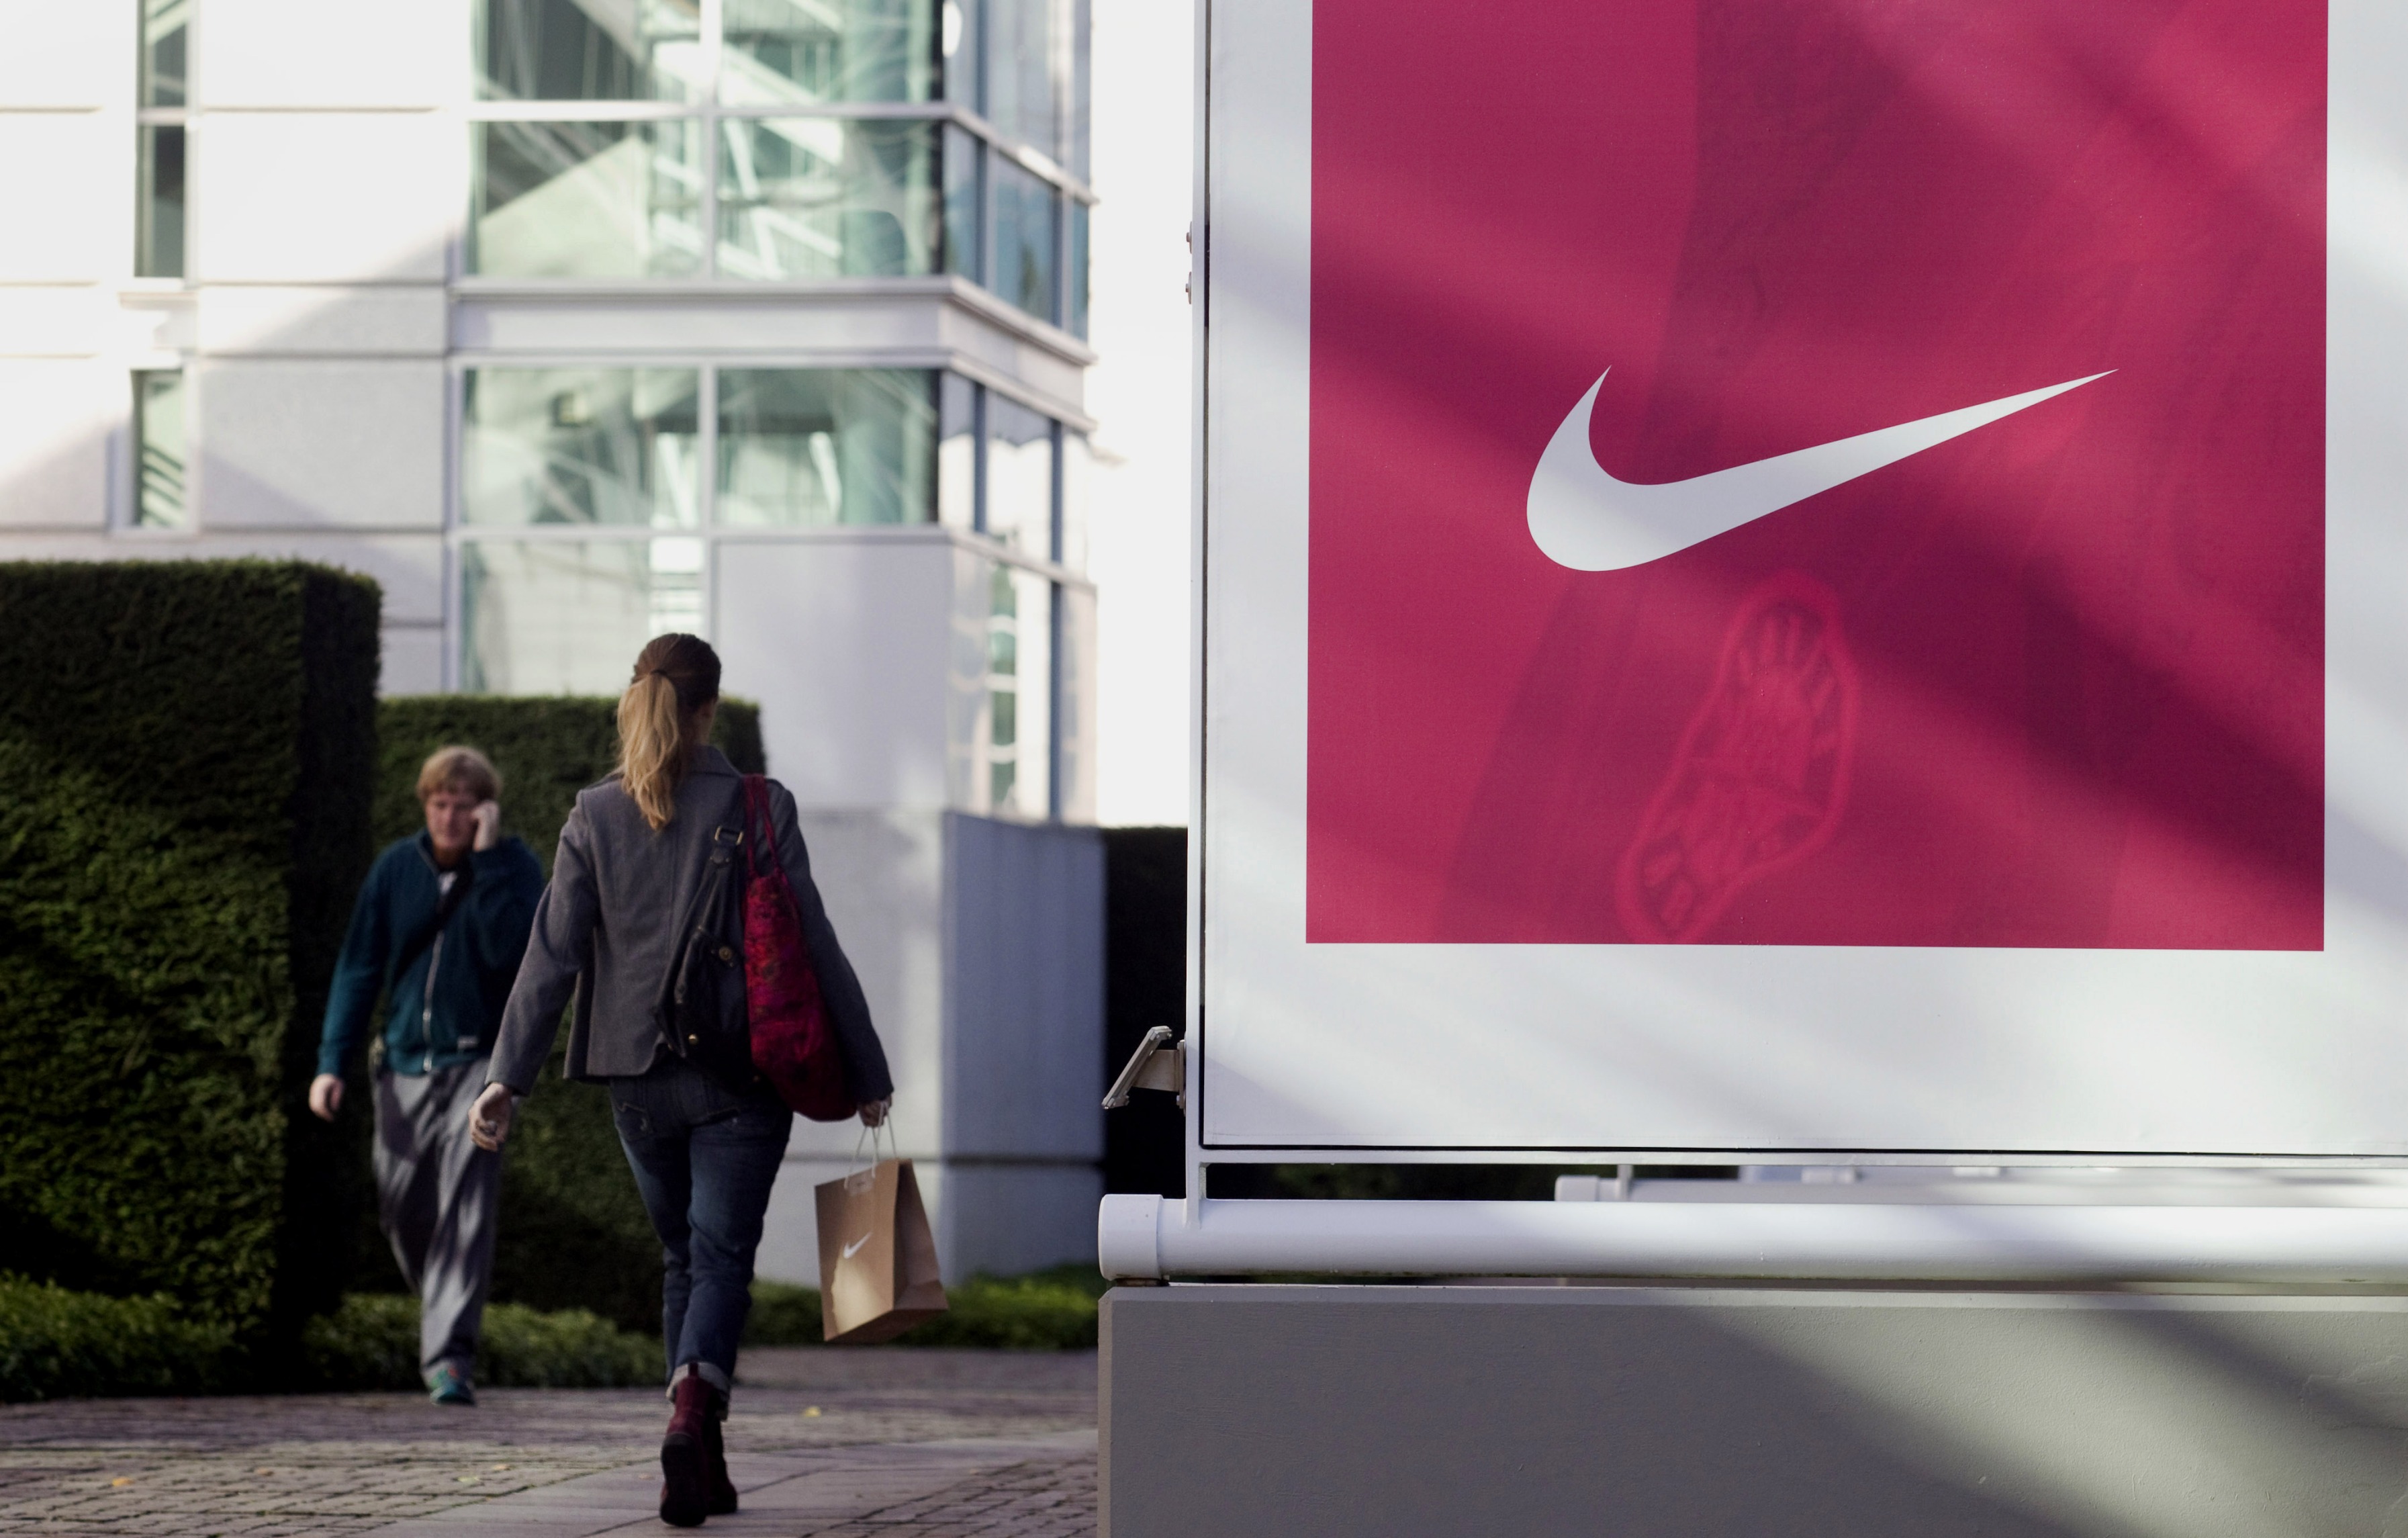 Nike Pay Persisted After Salary Policy Changes, Lawsuit Alleges - Bloomberg